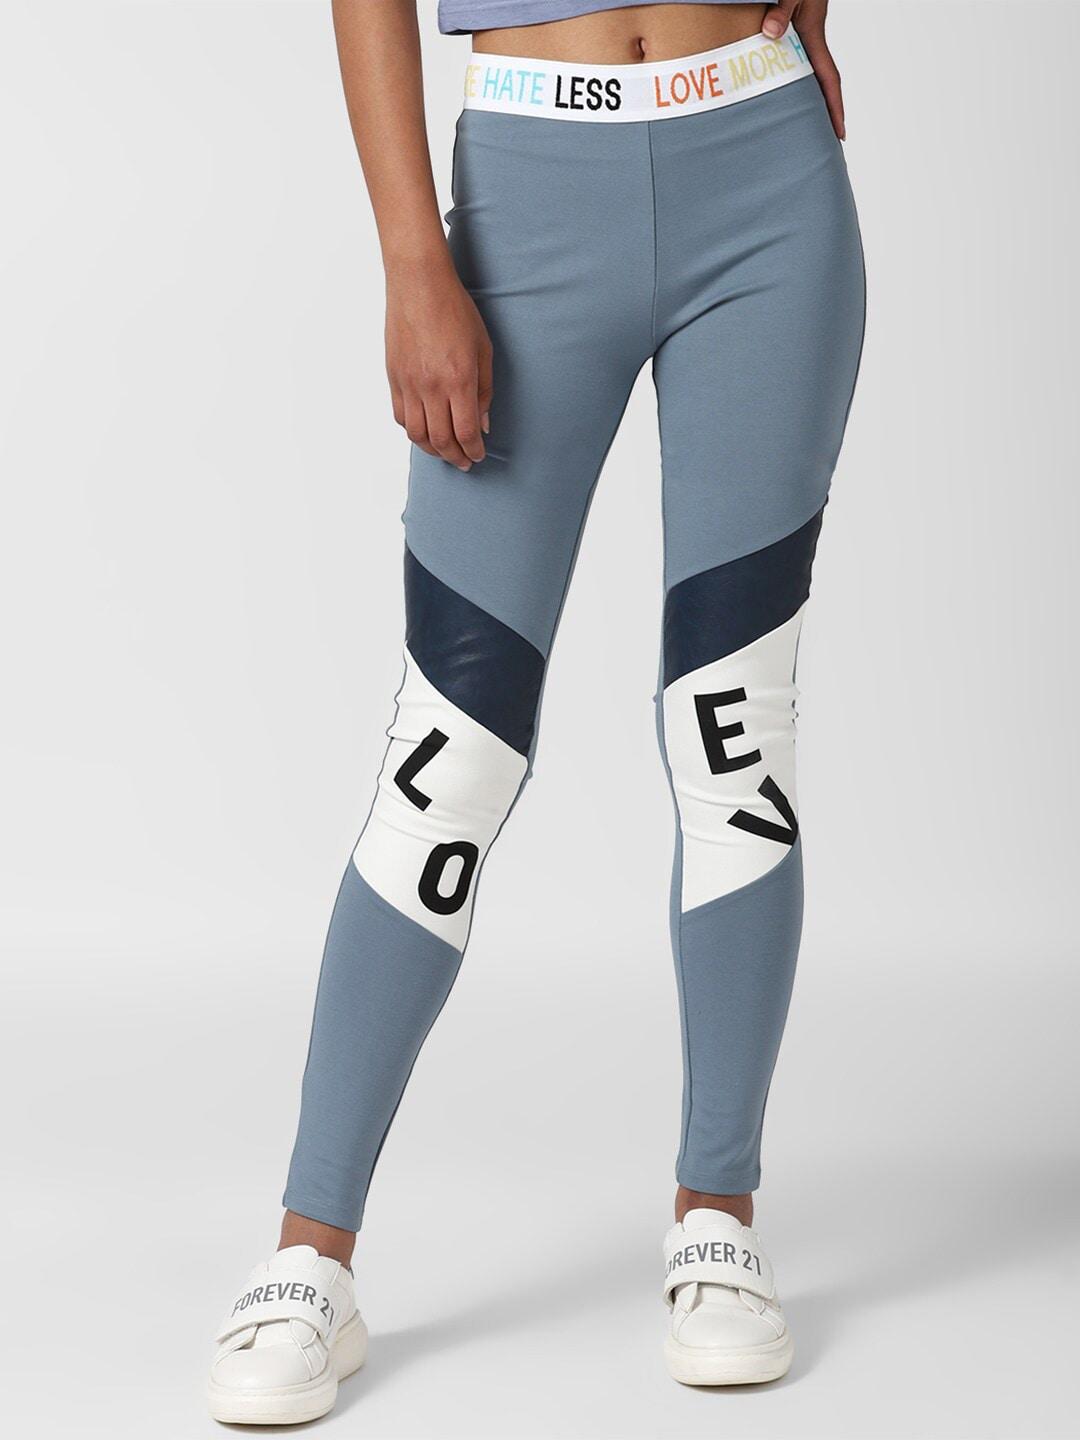 forever-21-women-blue-printed-tights